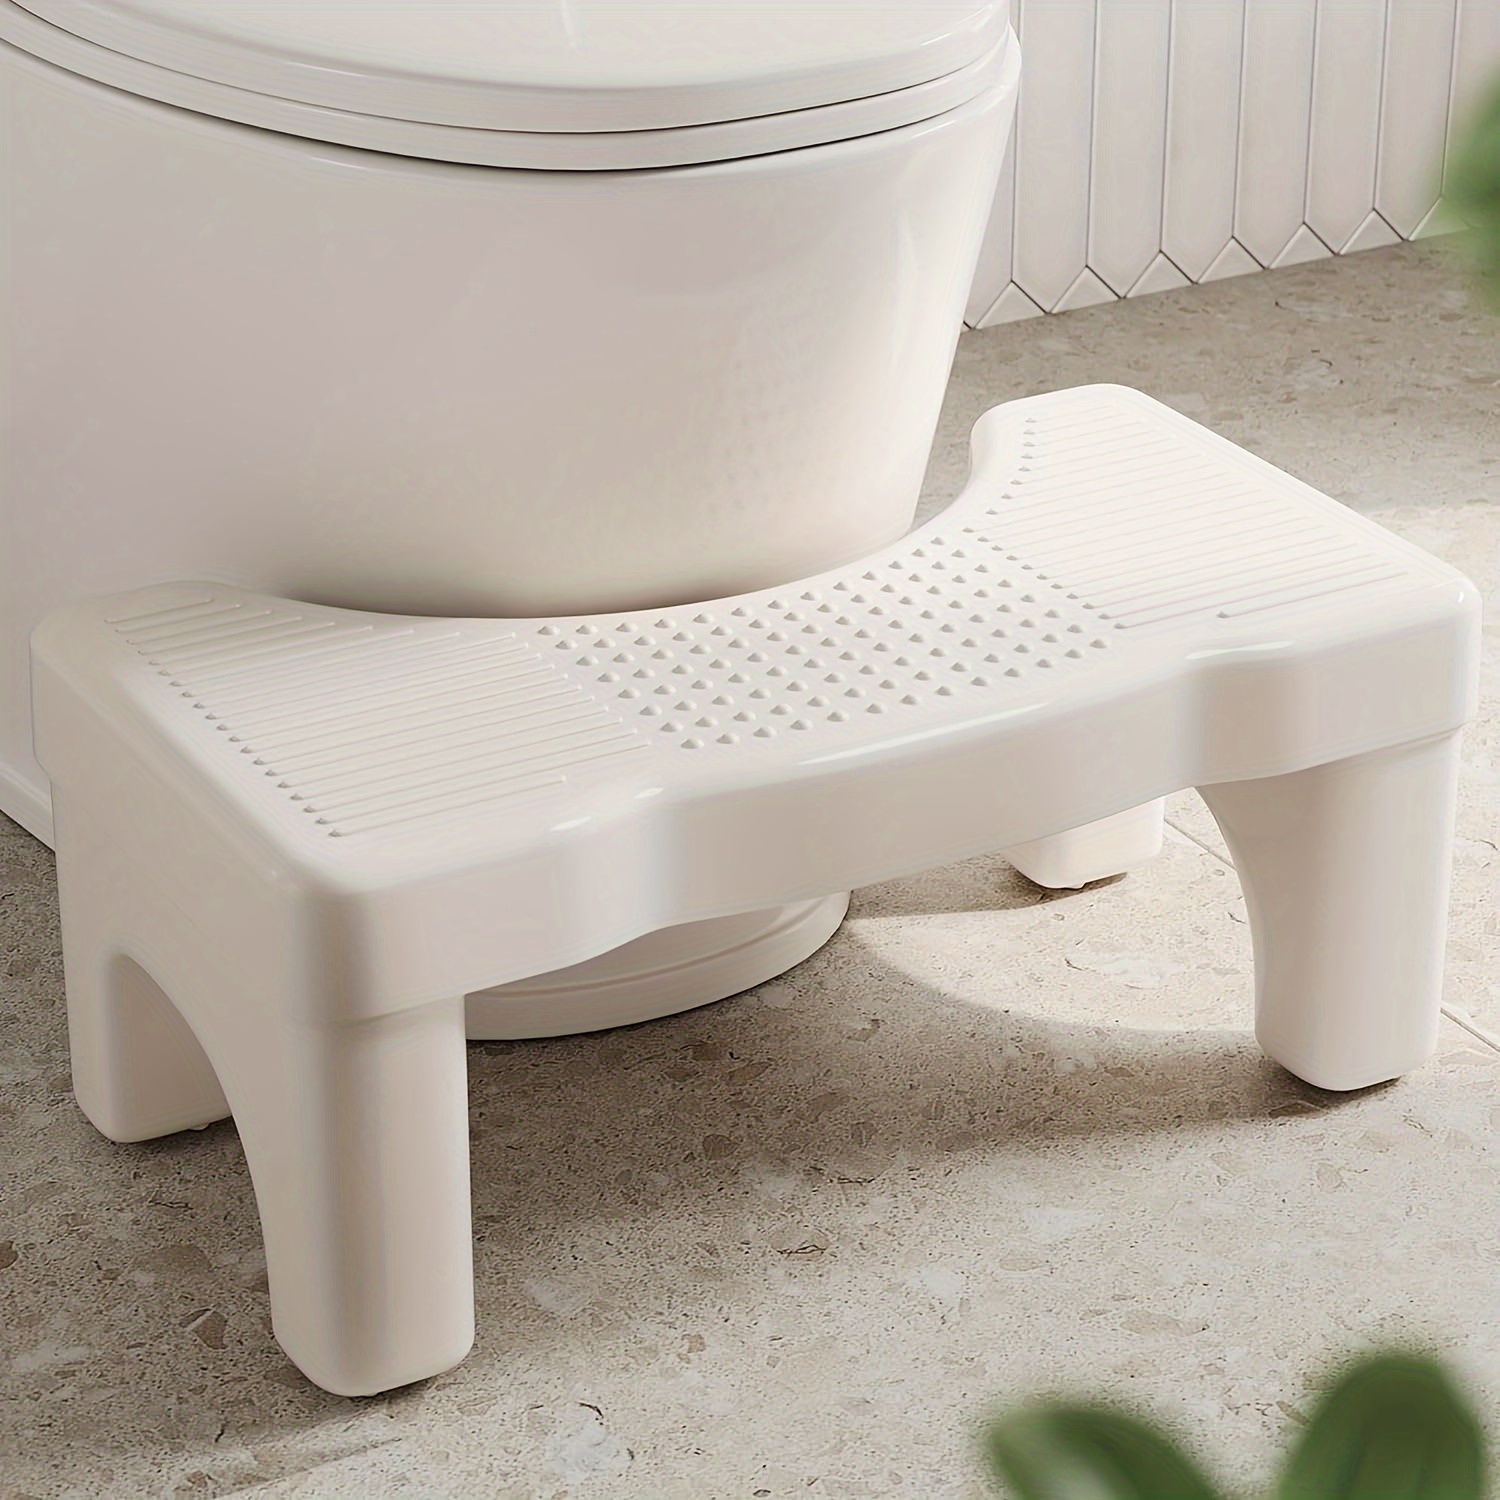 

Premium Toilet Stool Squat For Adults, Non-slip Squatting Poop Stool For Bathroom, Sturdy Pooping Stool, Toilet Step Stool For Kids/toddlers, 7 Inch Potty Foot Stool